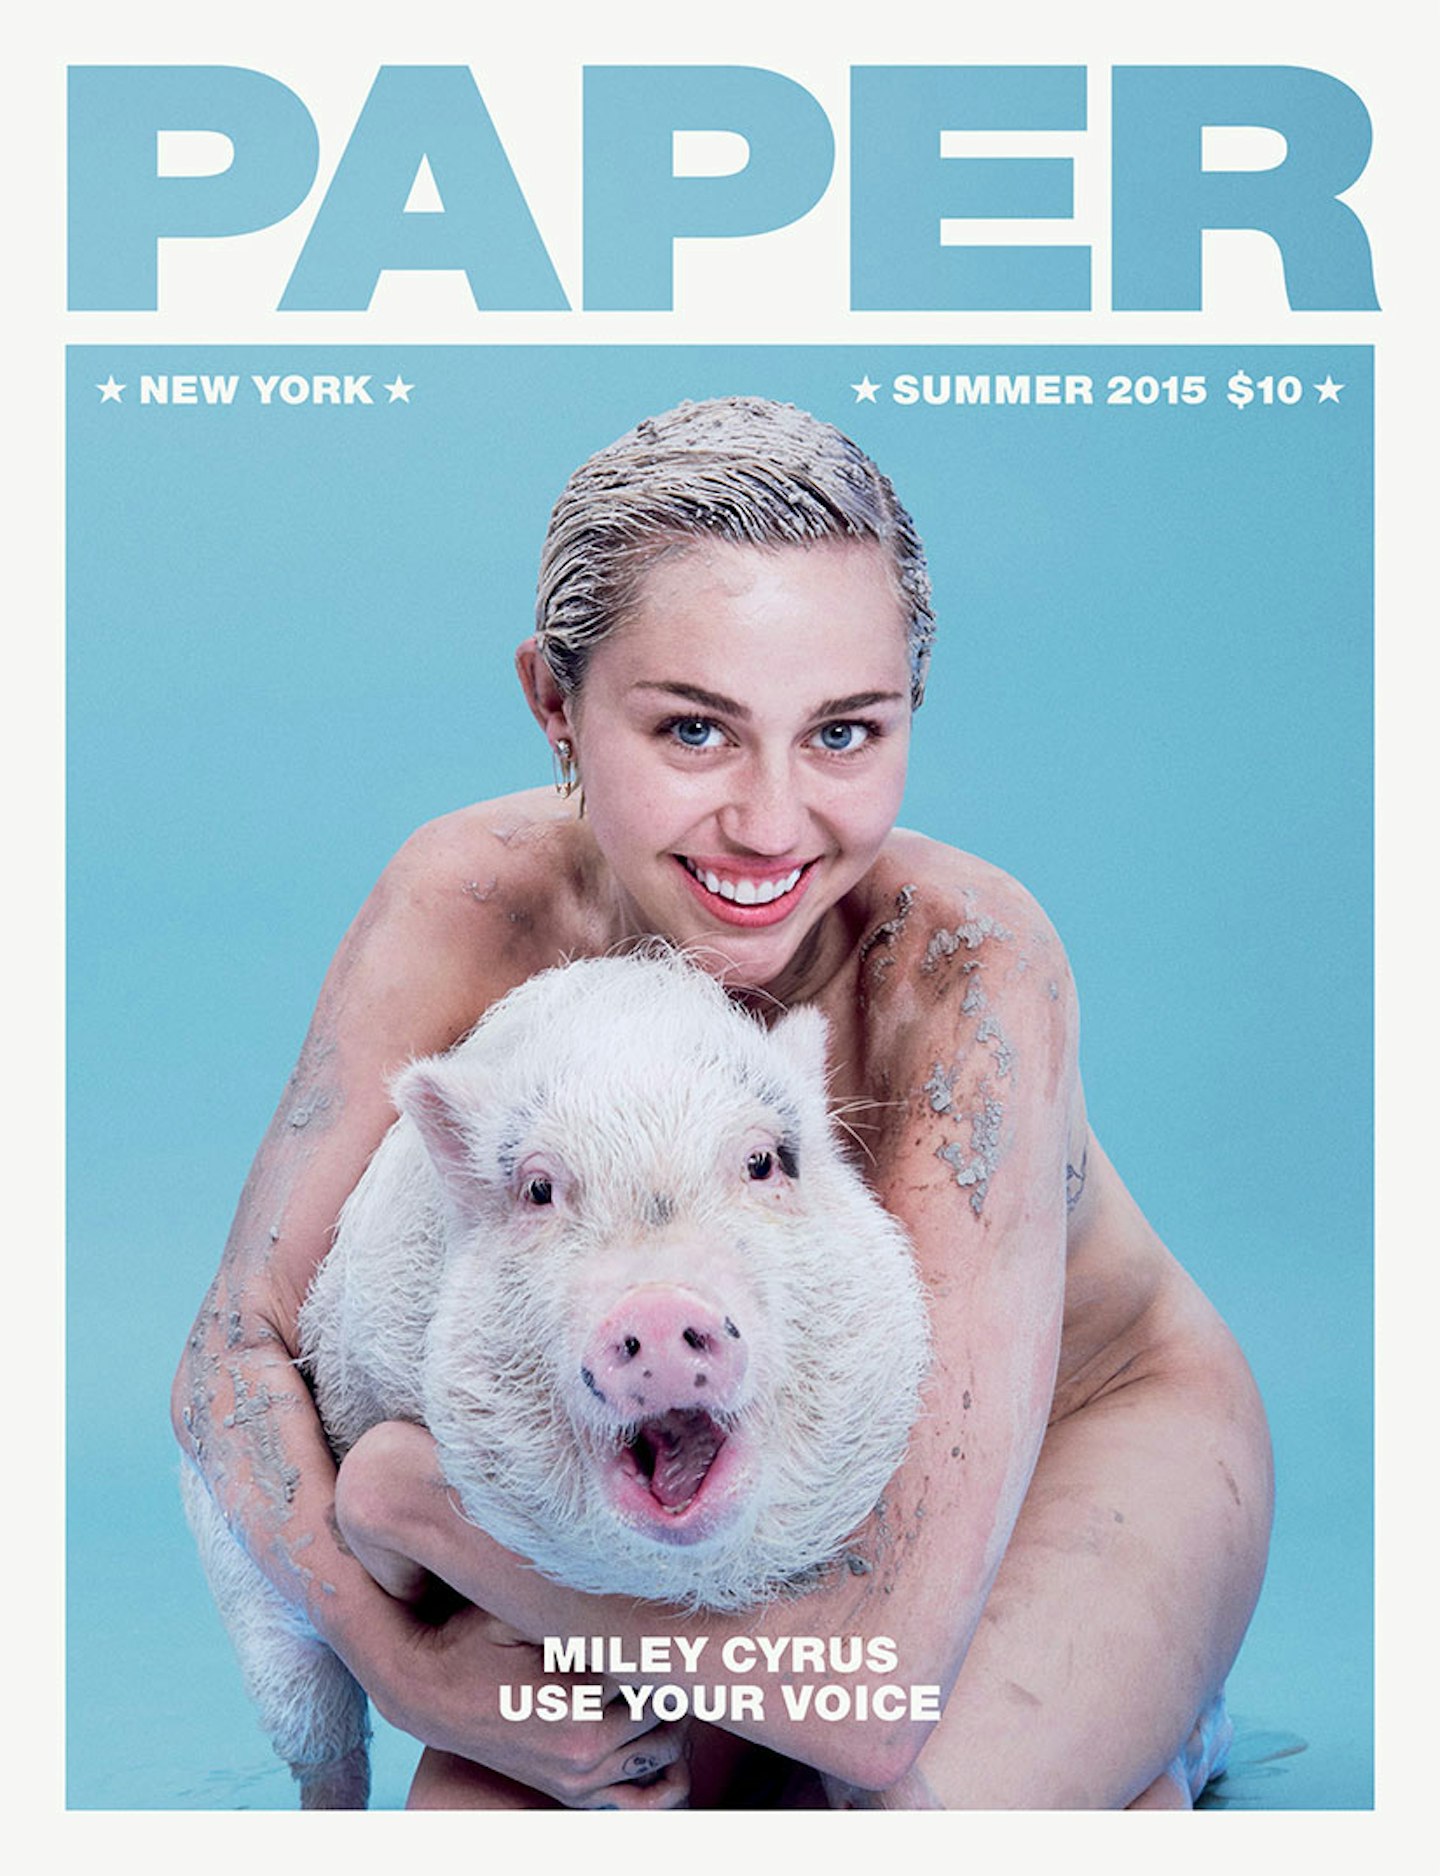 Miley Cyrus for PAPER